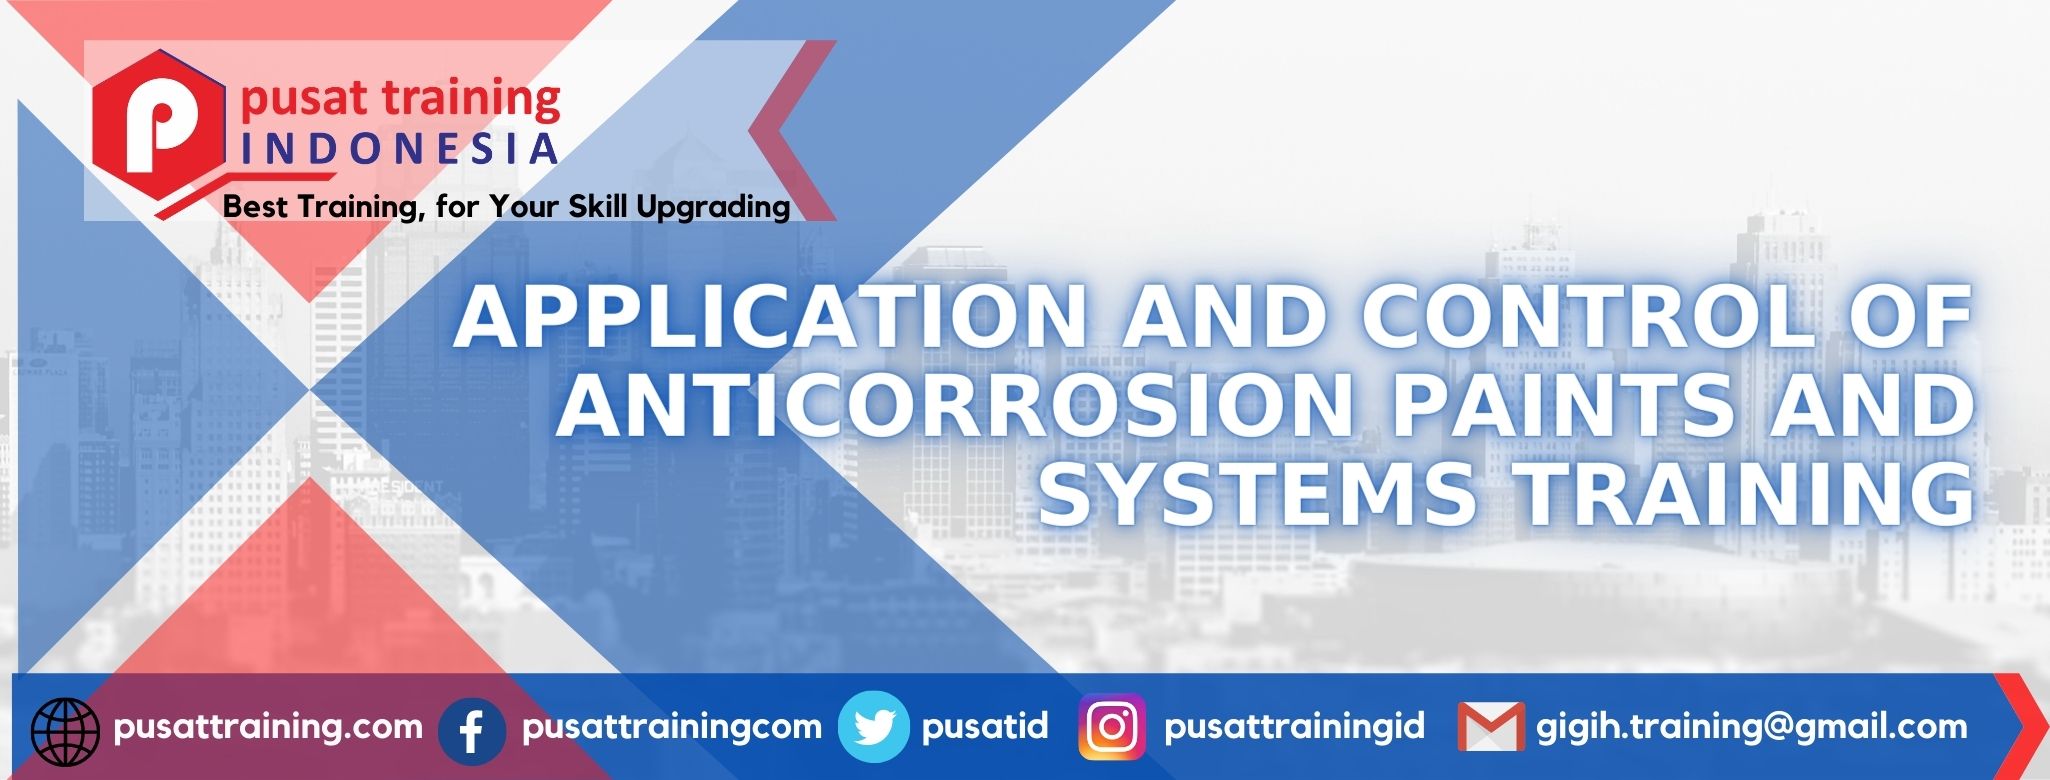 pelatihan-application-and-control-of-anticorrosion-paints-and-system